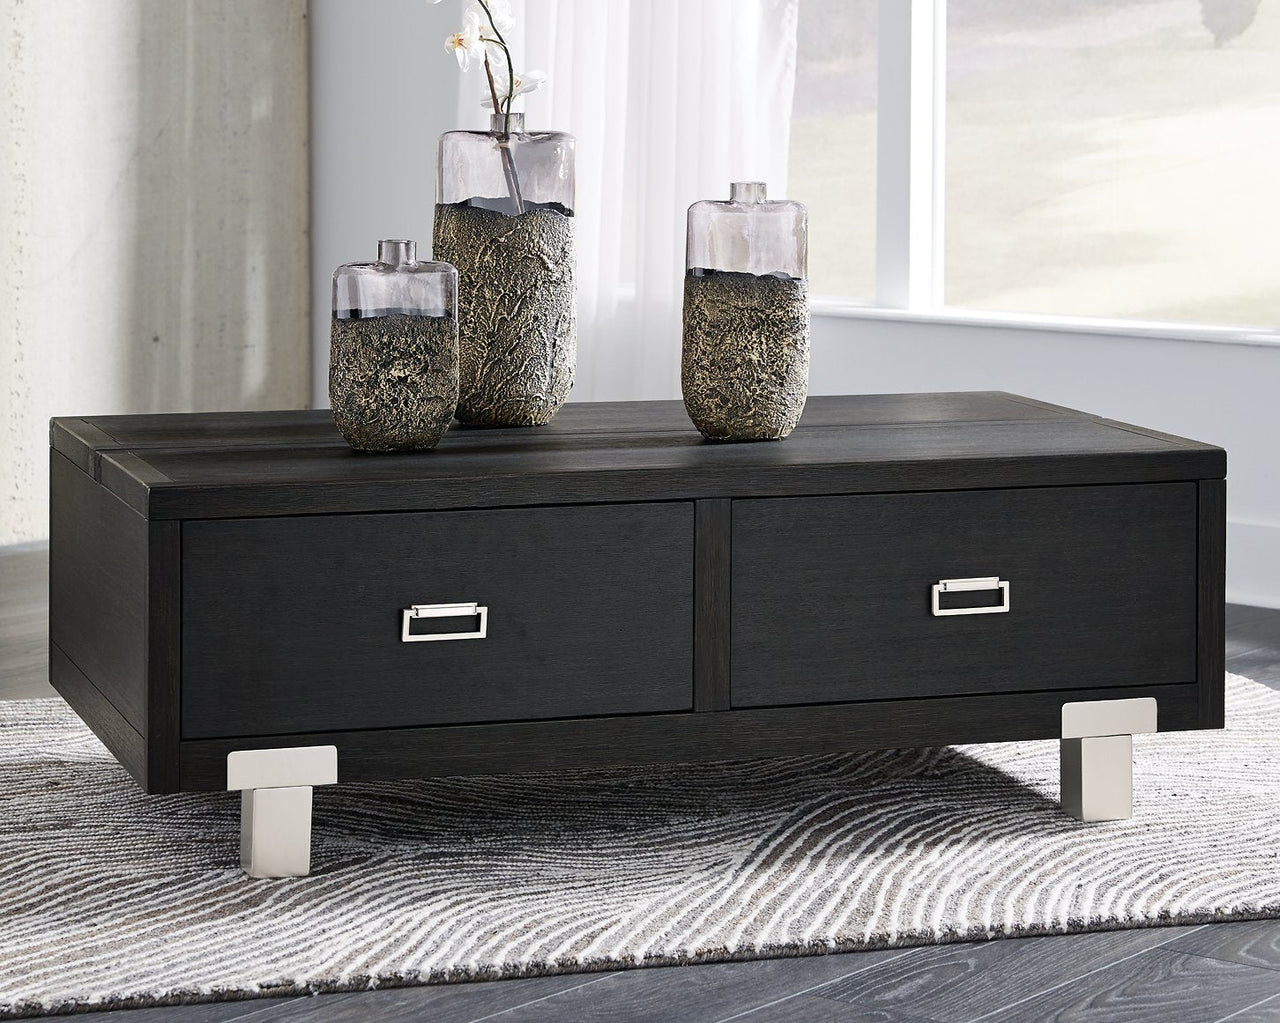 Chisago Lift-Top Coffee Table image